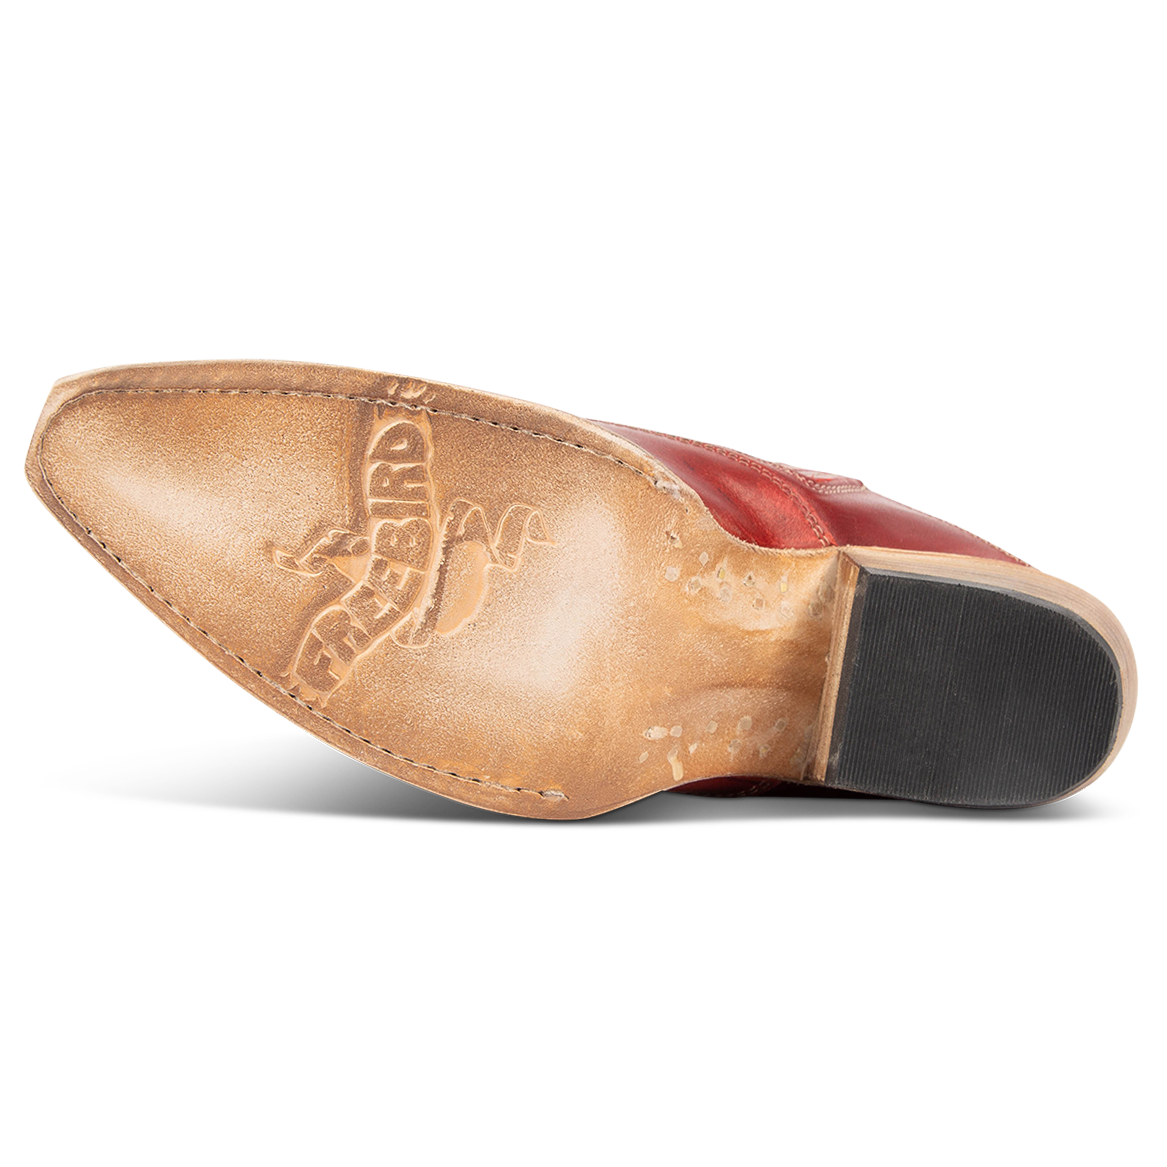 Leather sole imprinted with FREEBIRD on women's Wentworth red western mule